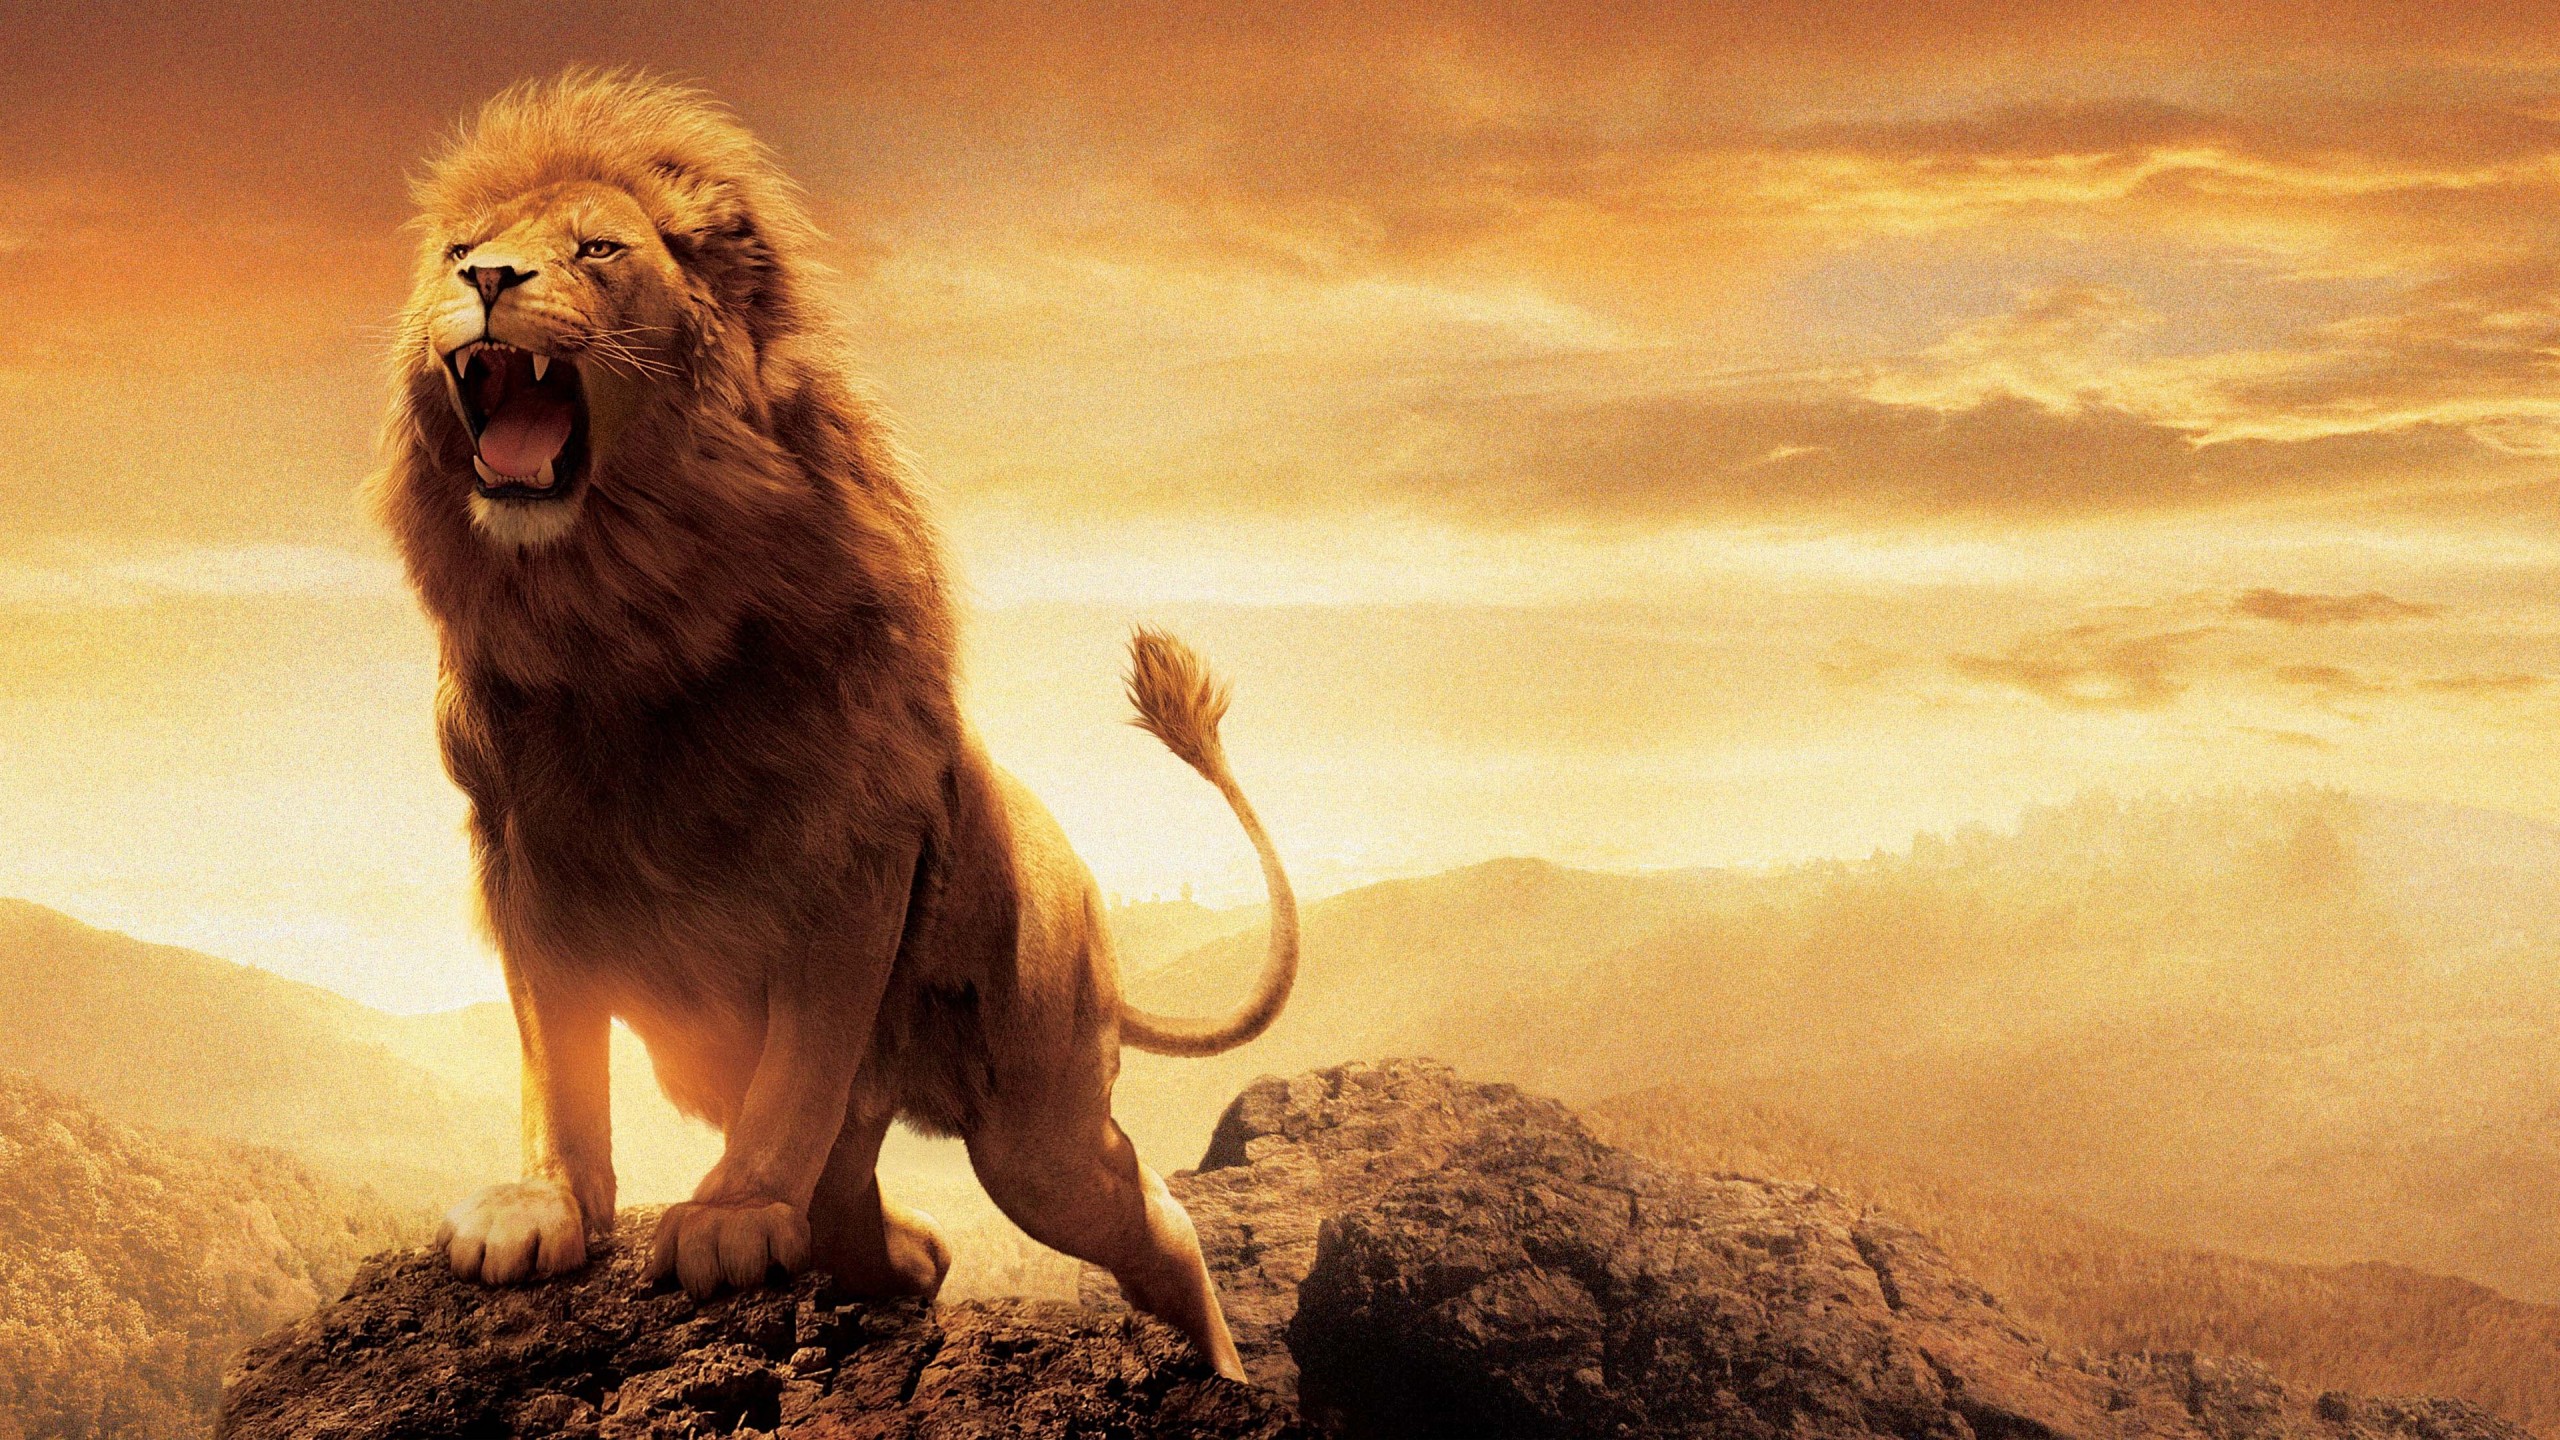 Aslan Narnia Lion Hd Wallpaper for Desktop and Mobiles - Youtube Cover Phot...